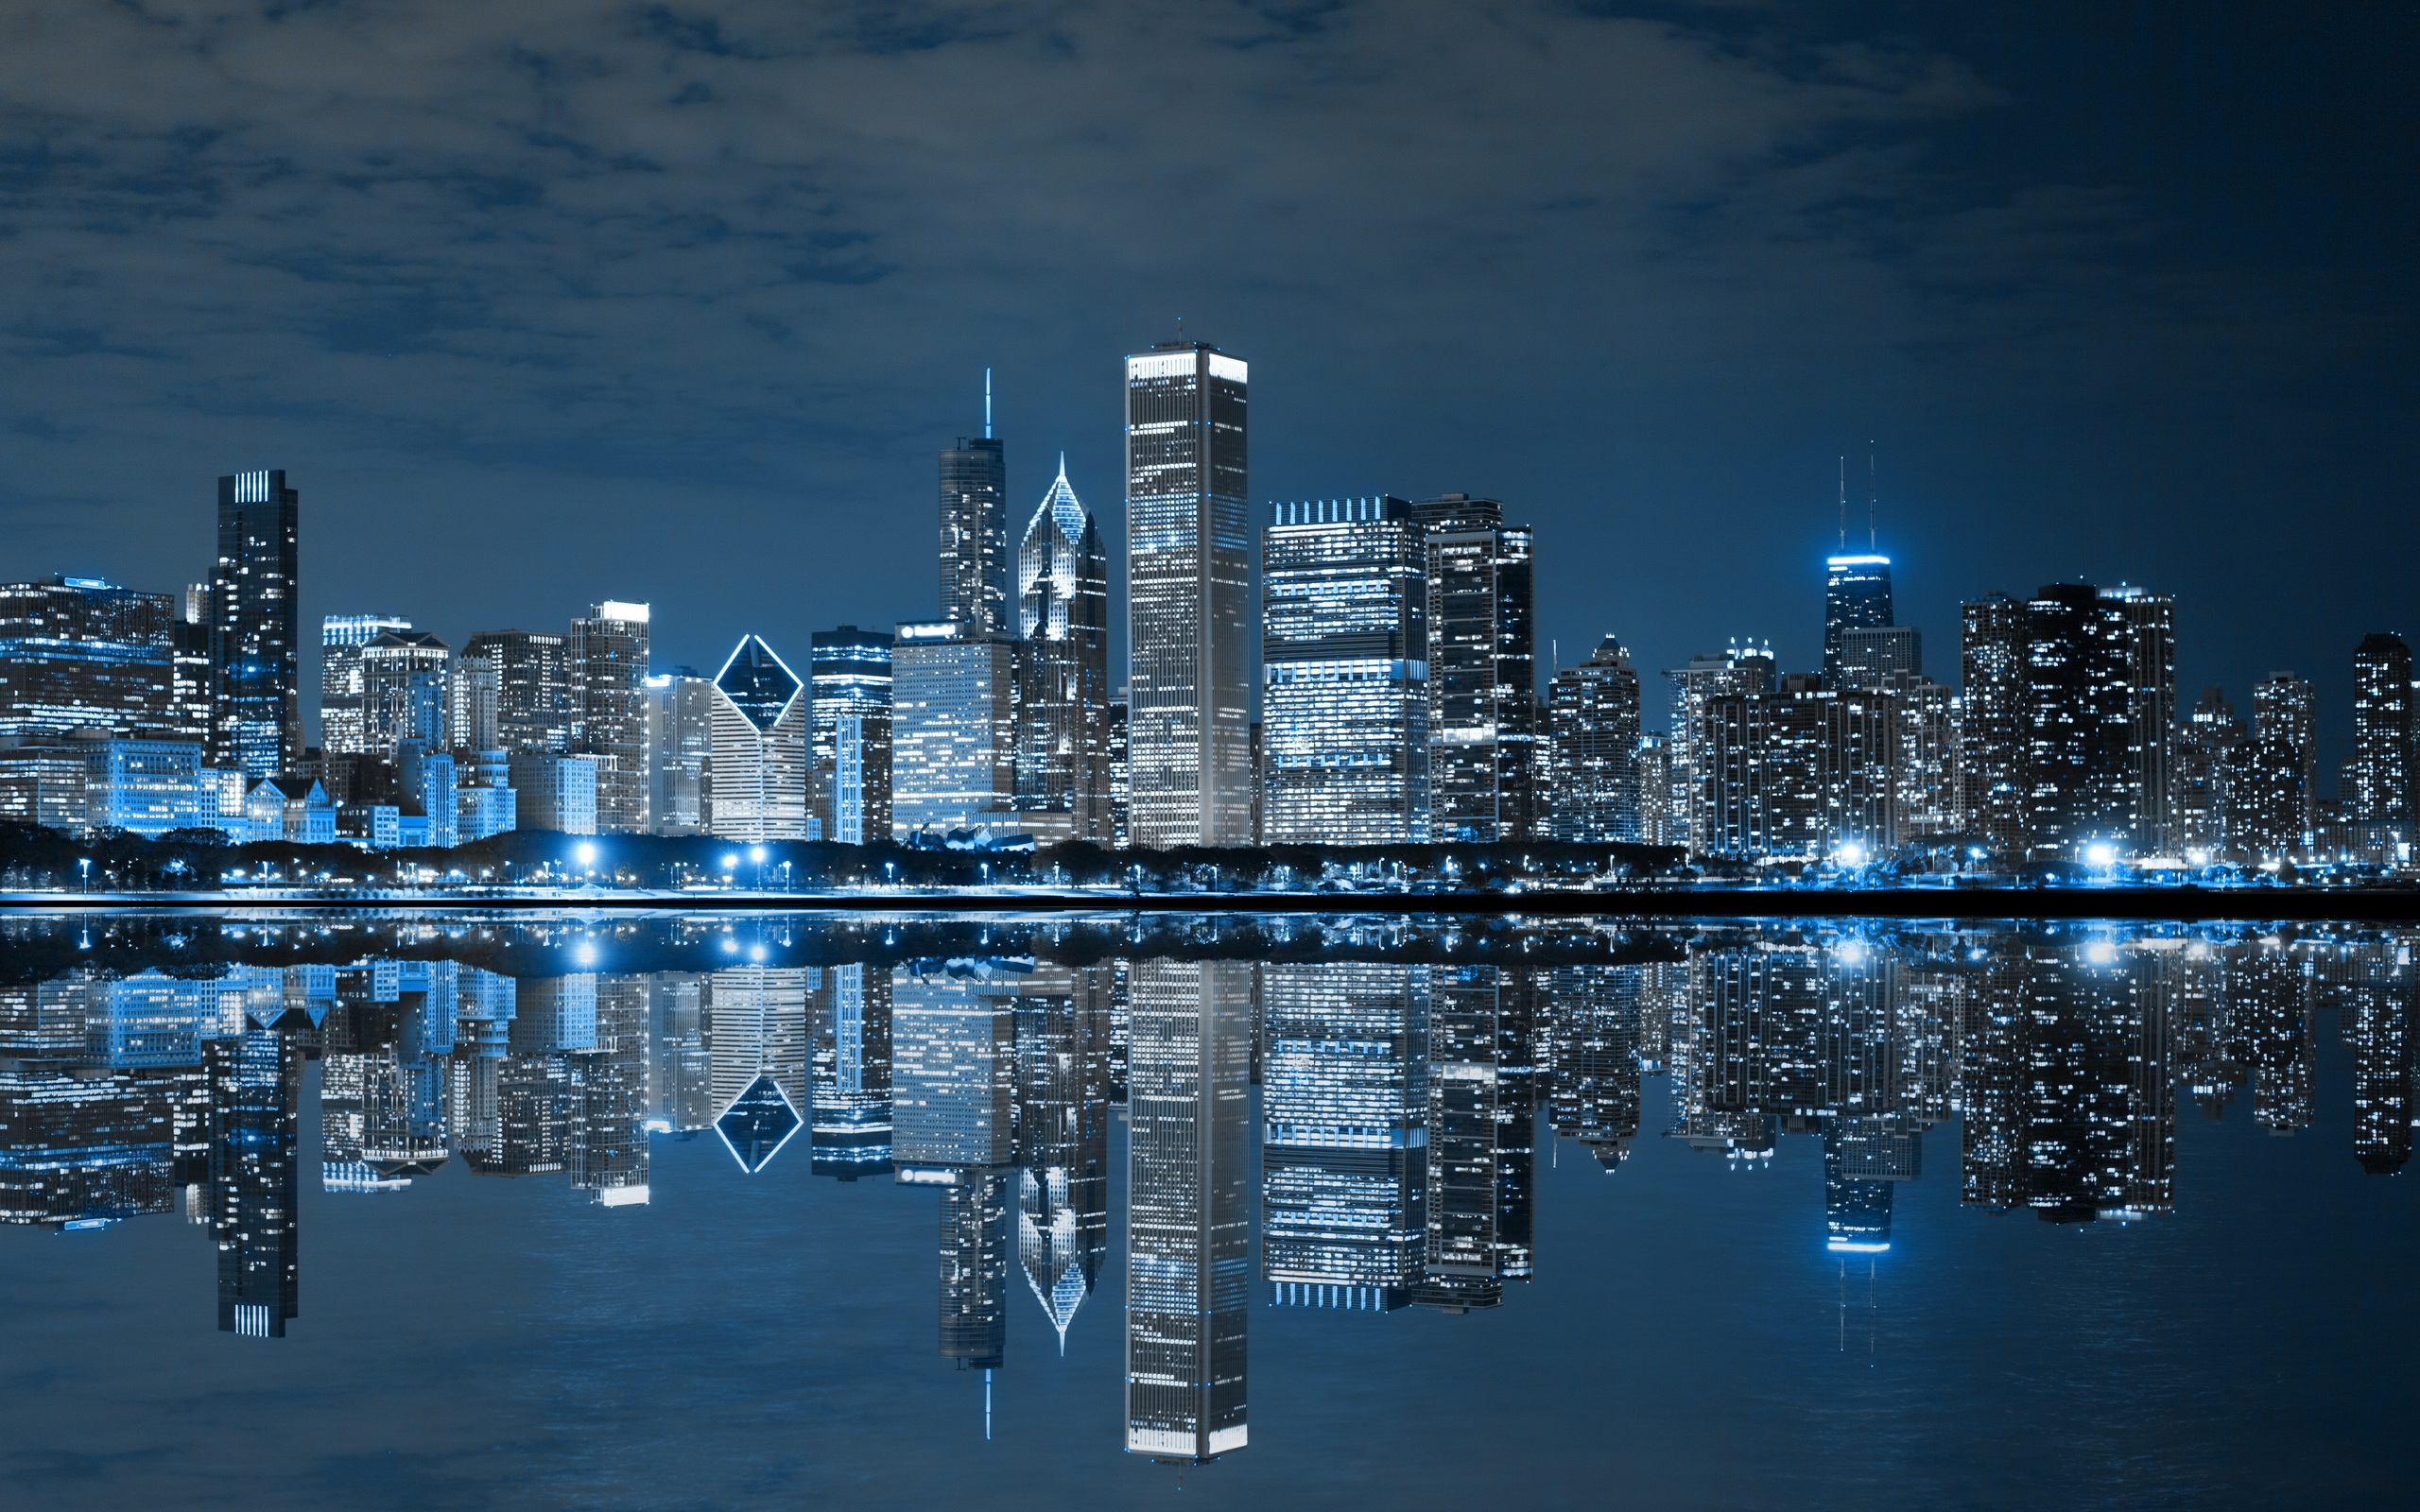 General 2560x1600 city city lights reflection water night urban Chicago USA